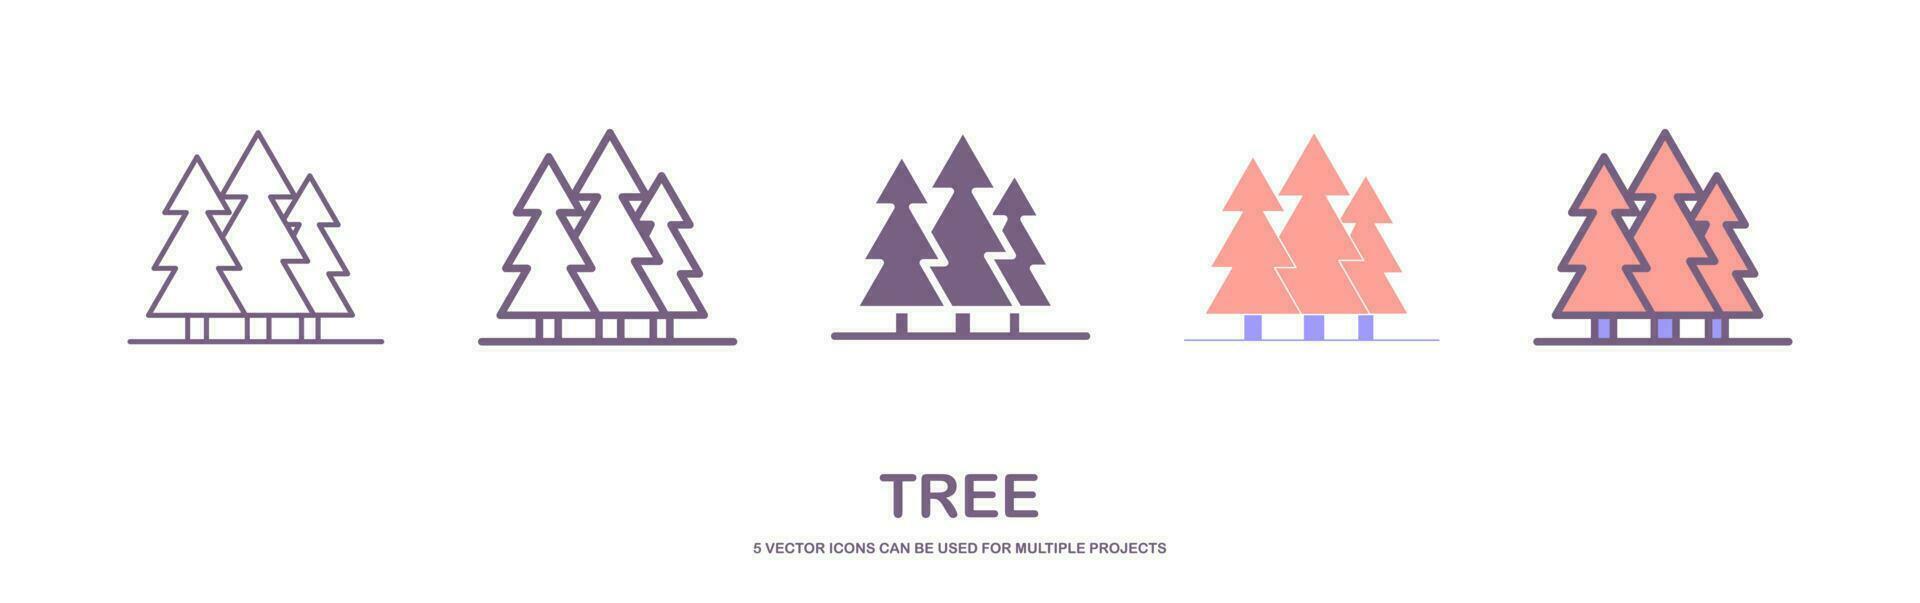 Collection of trees illustrations. Can be used to illustrate any nature or healthy lifestyle topic. set of tree icons. vector